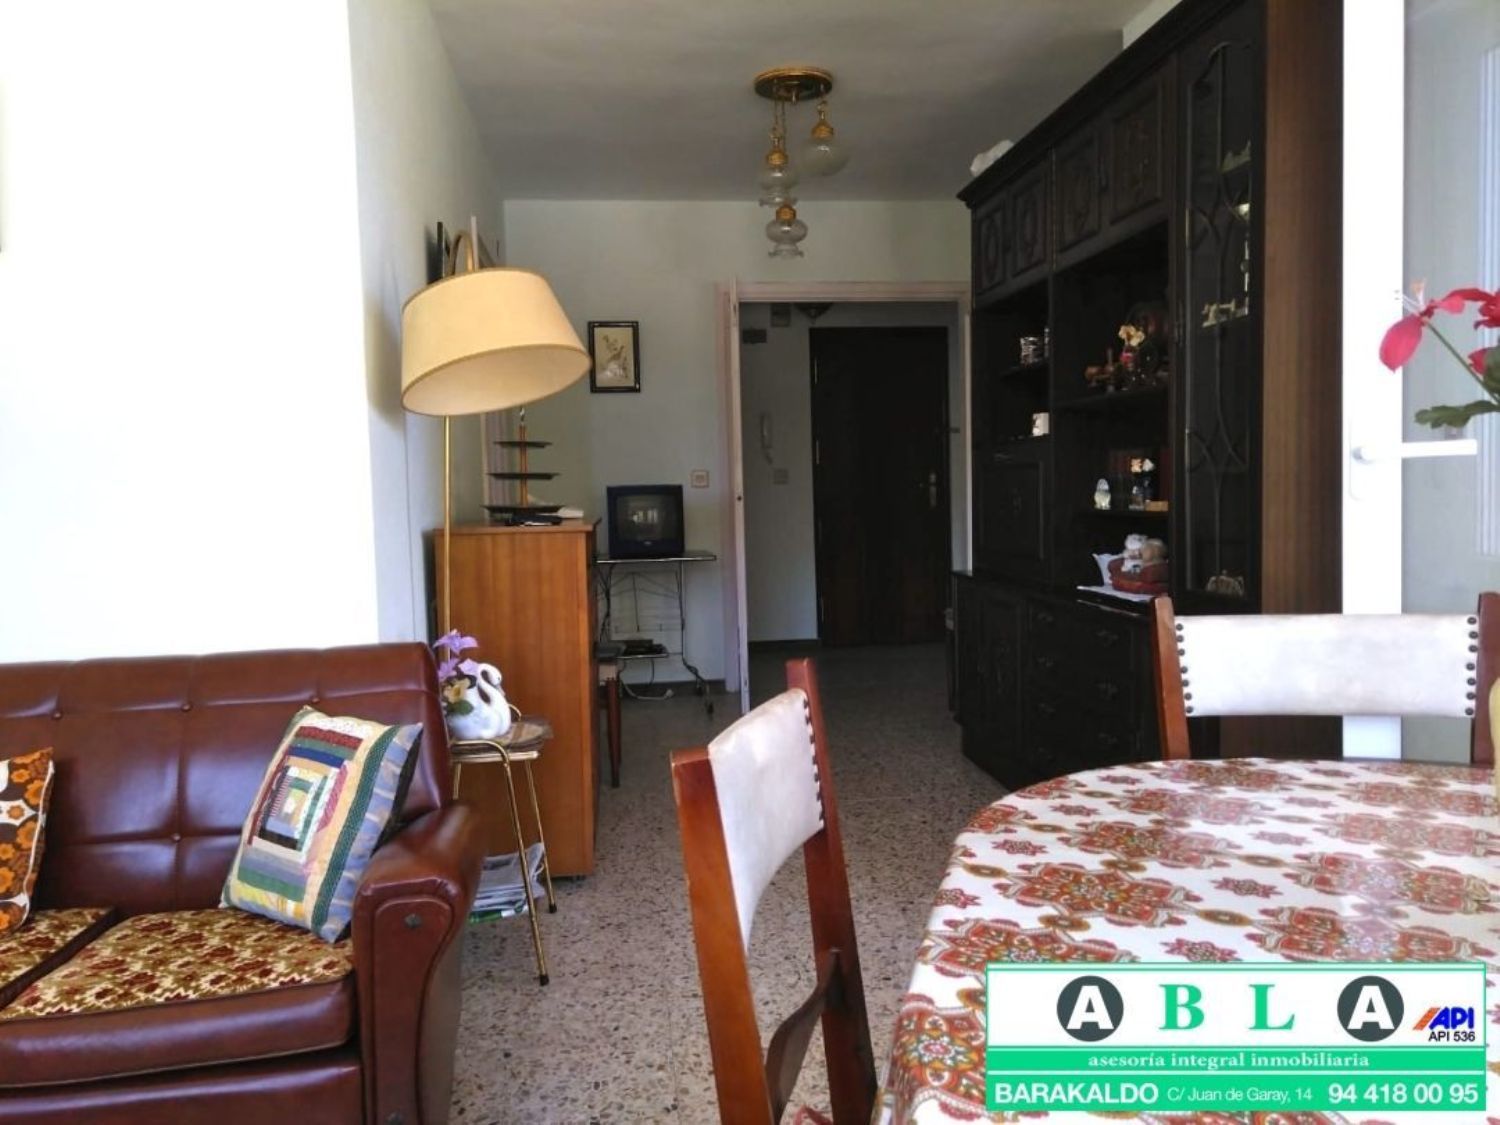 Apartment for sale on the seafront in the Oriñón neighborhood, in Casto-Urdiales